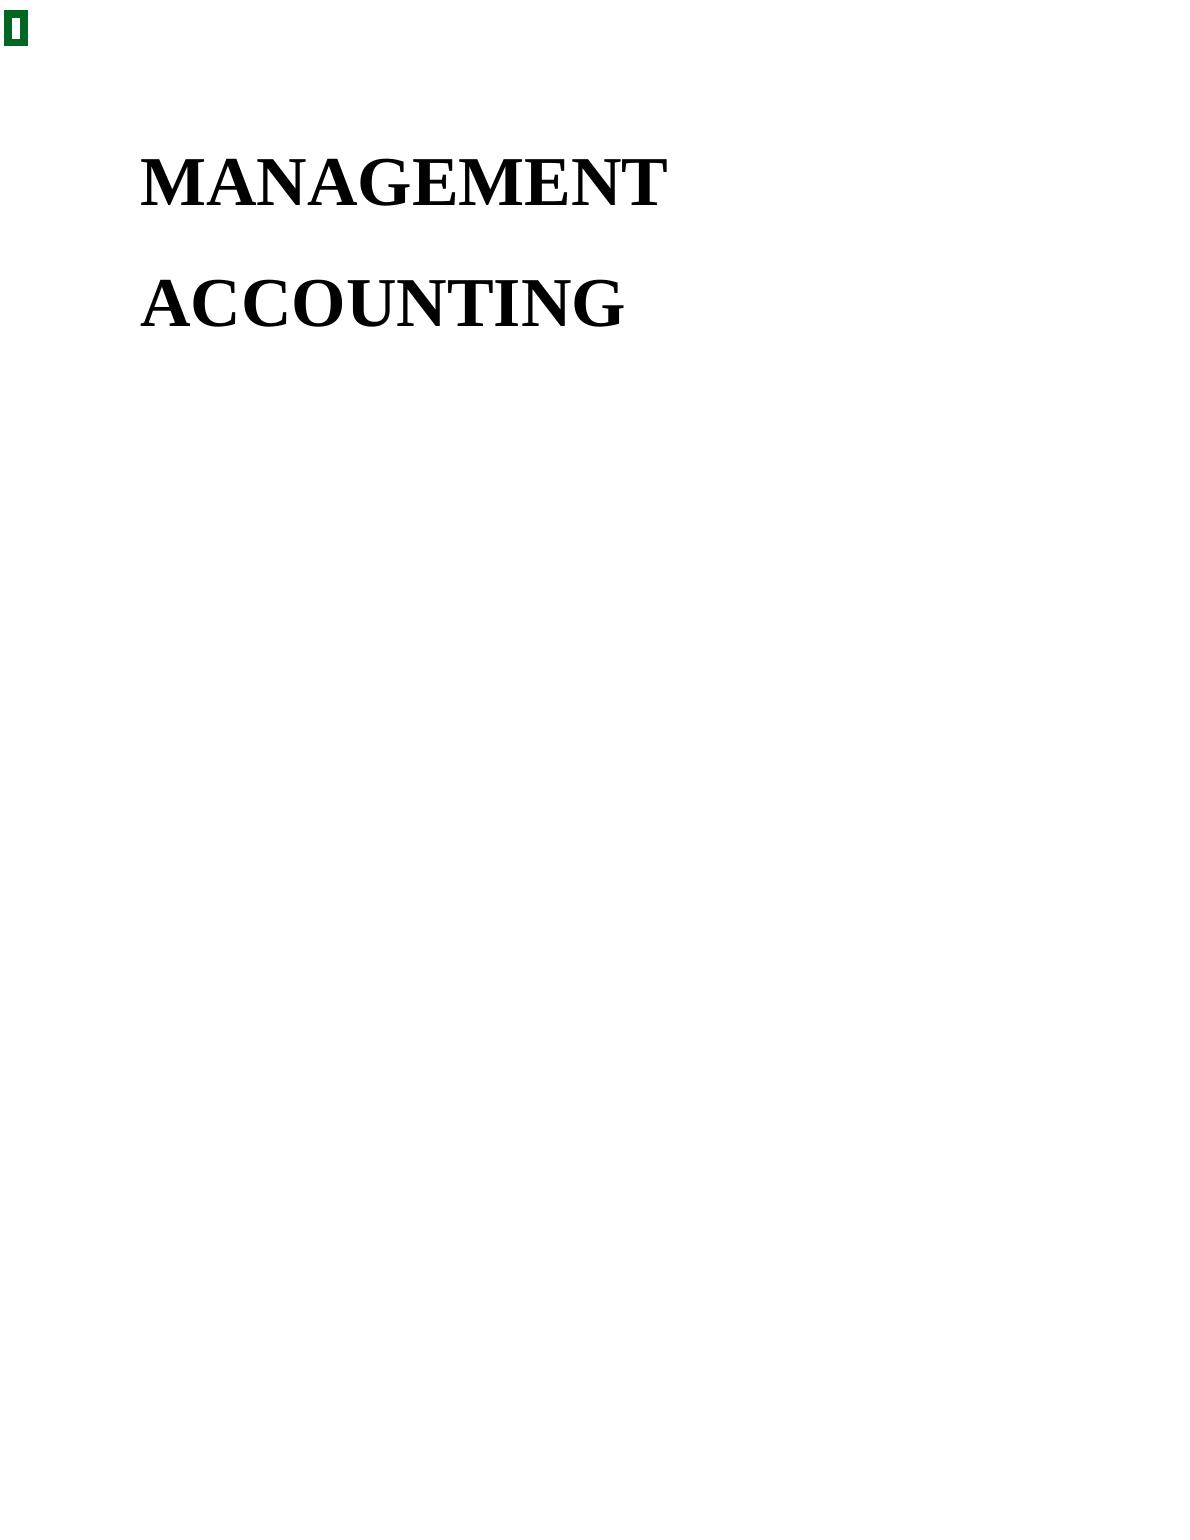 Management Accounting Assignment(MA )_1